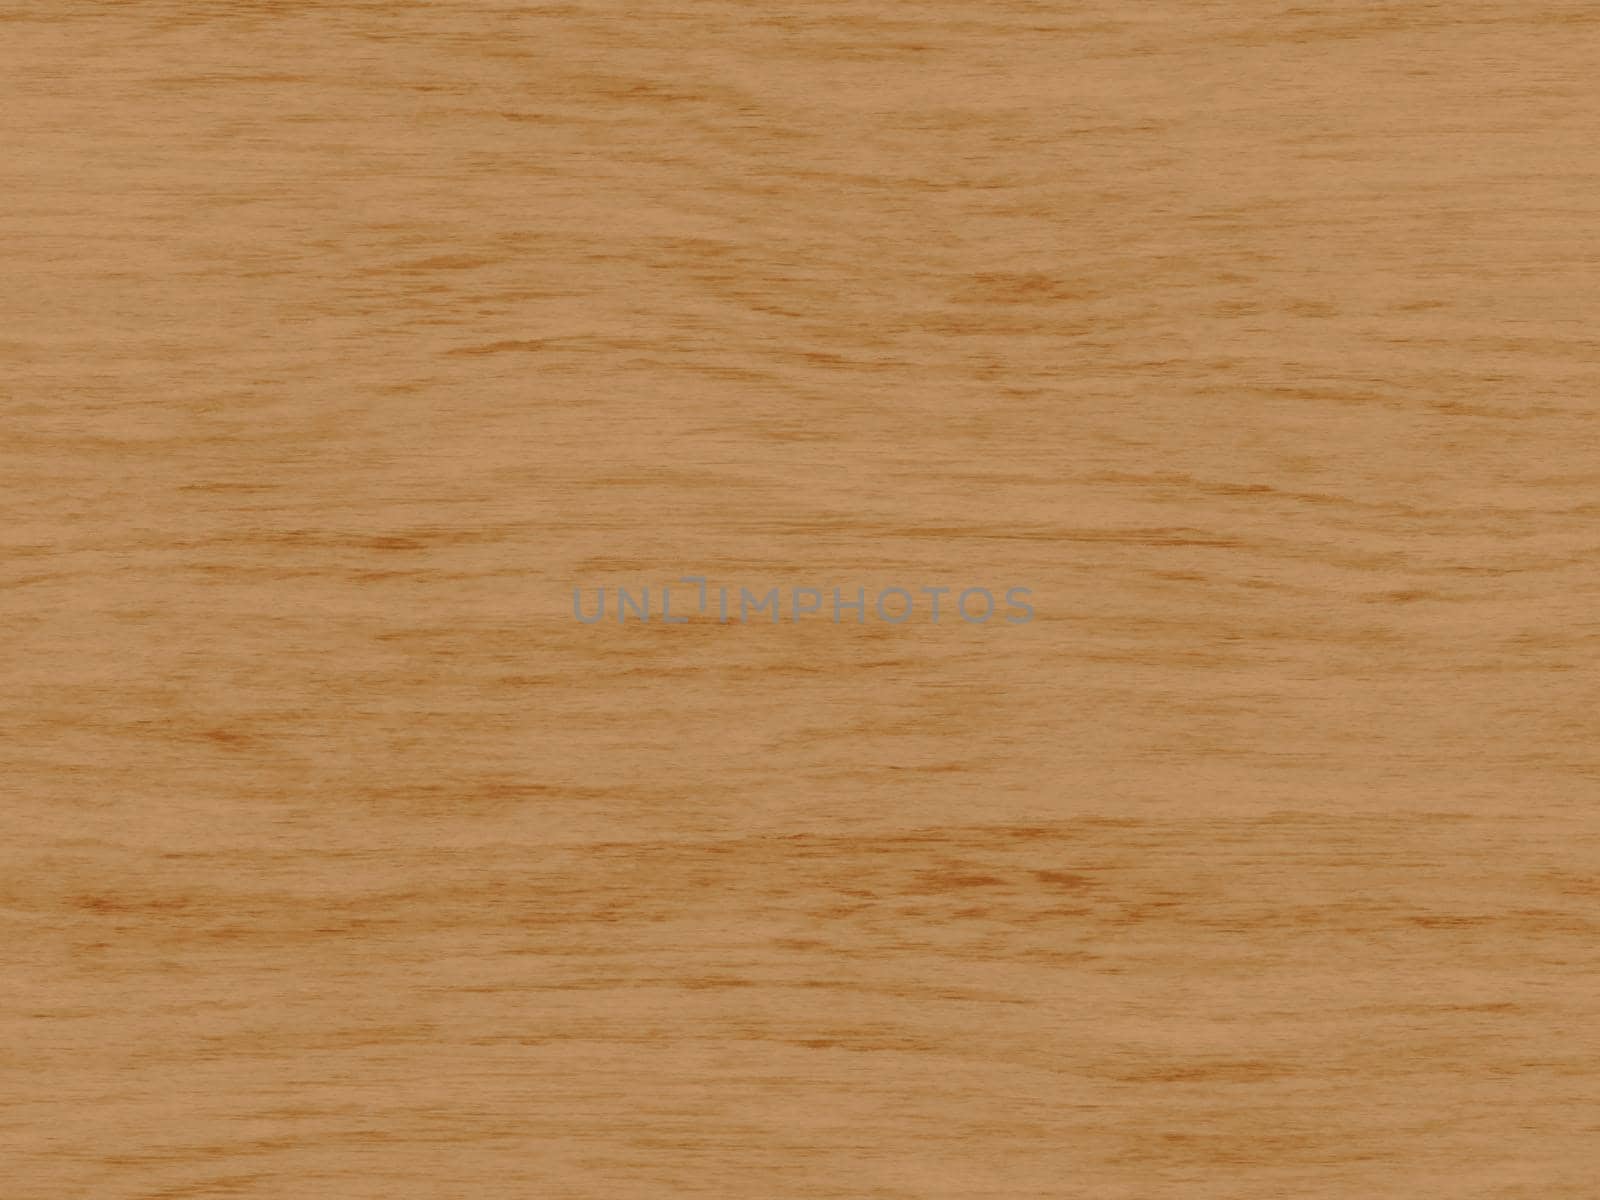 Natural white oak wood texture background. white oak veneer surface for interior and exterior manufacturers use. by Maharana777